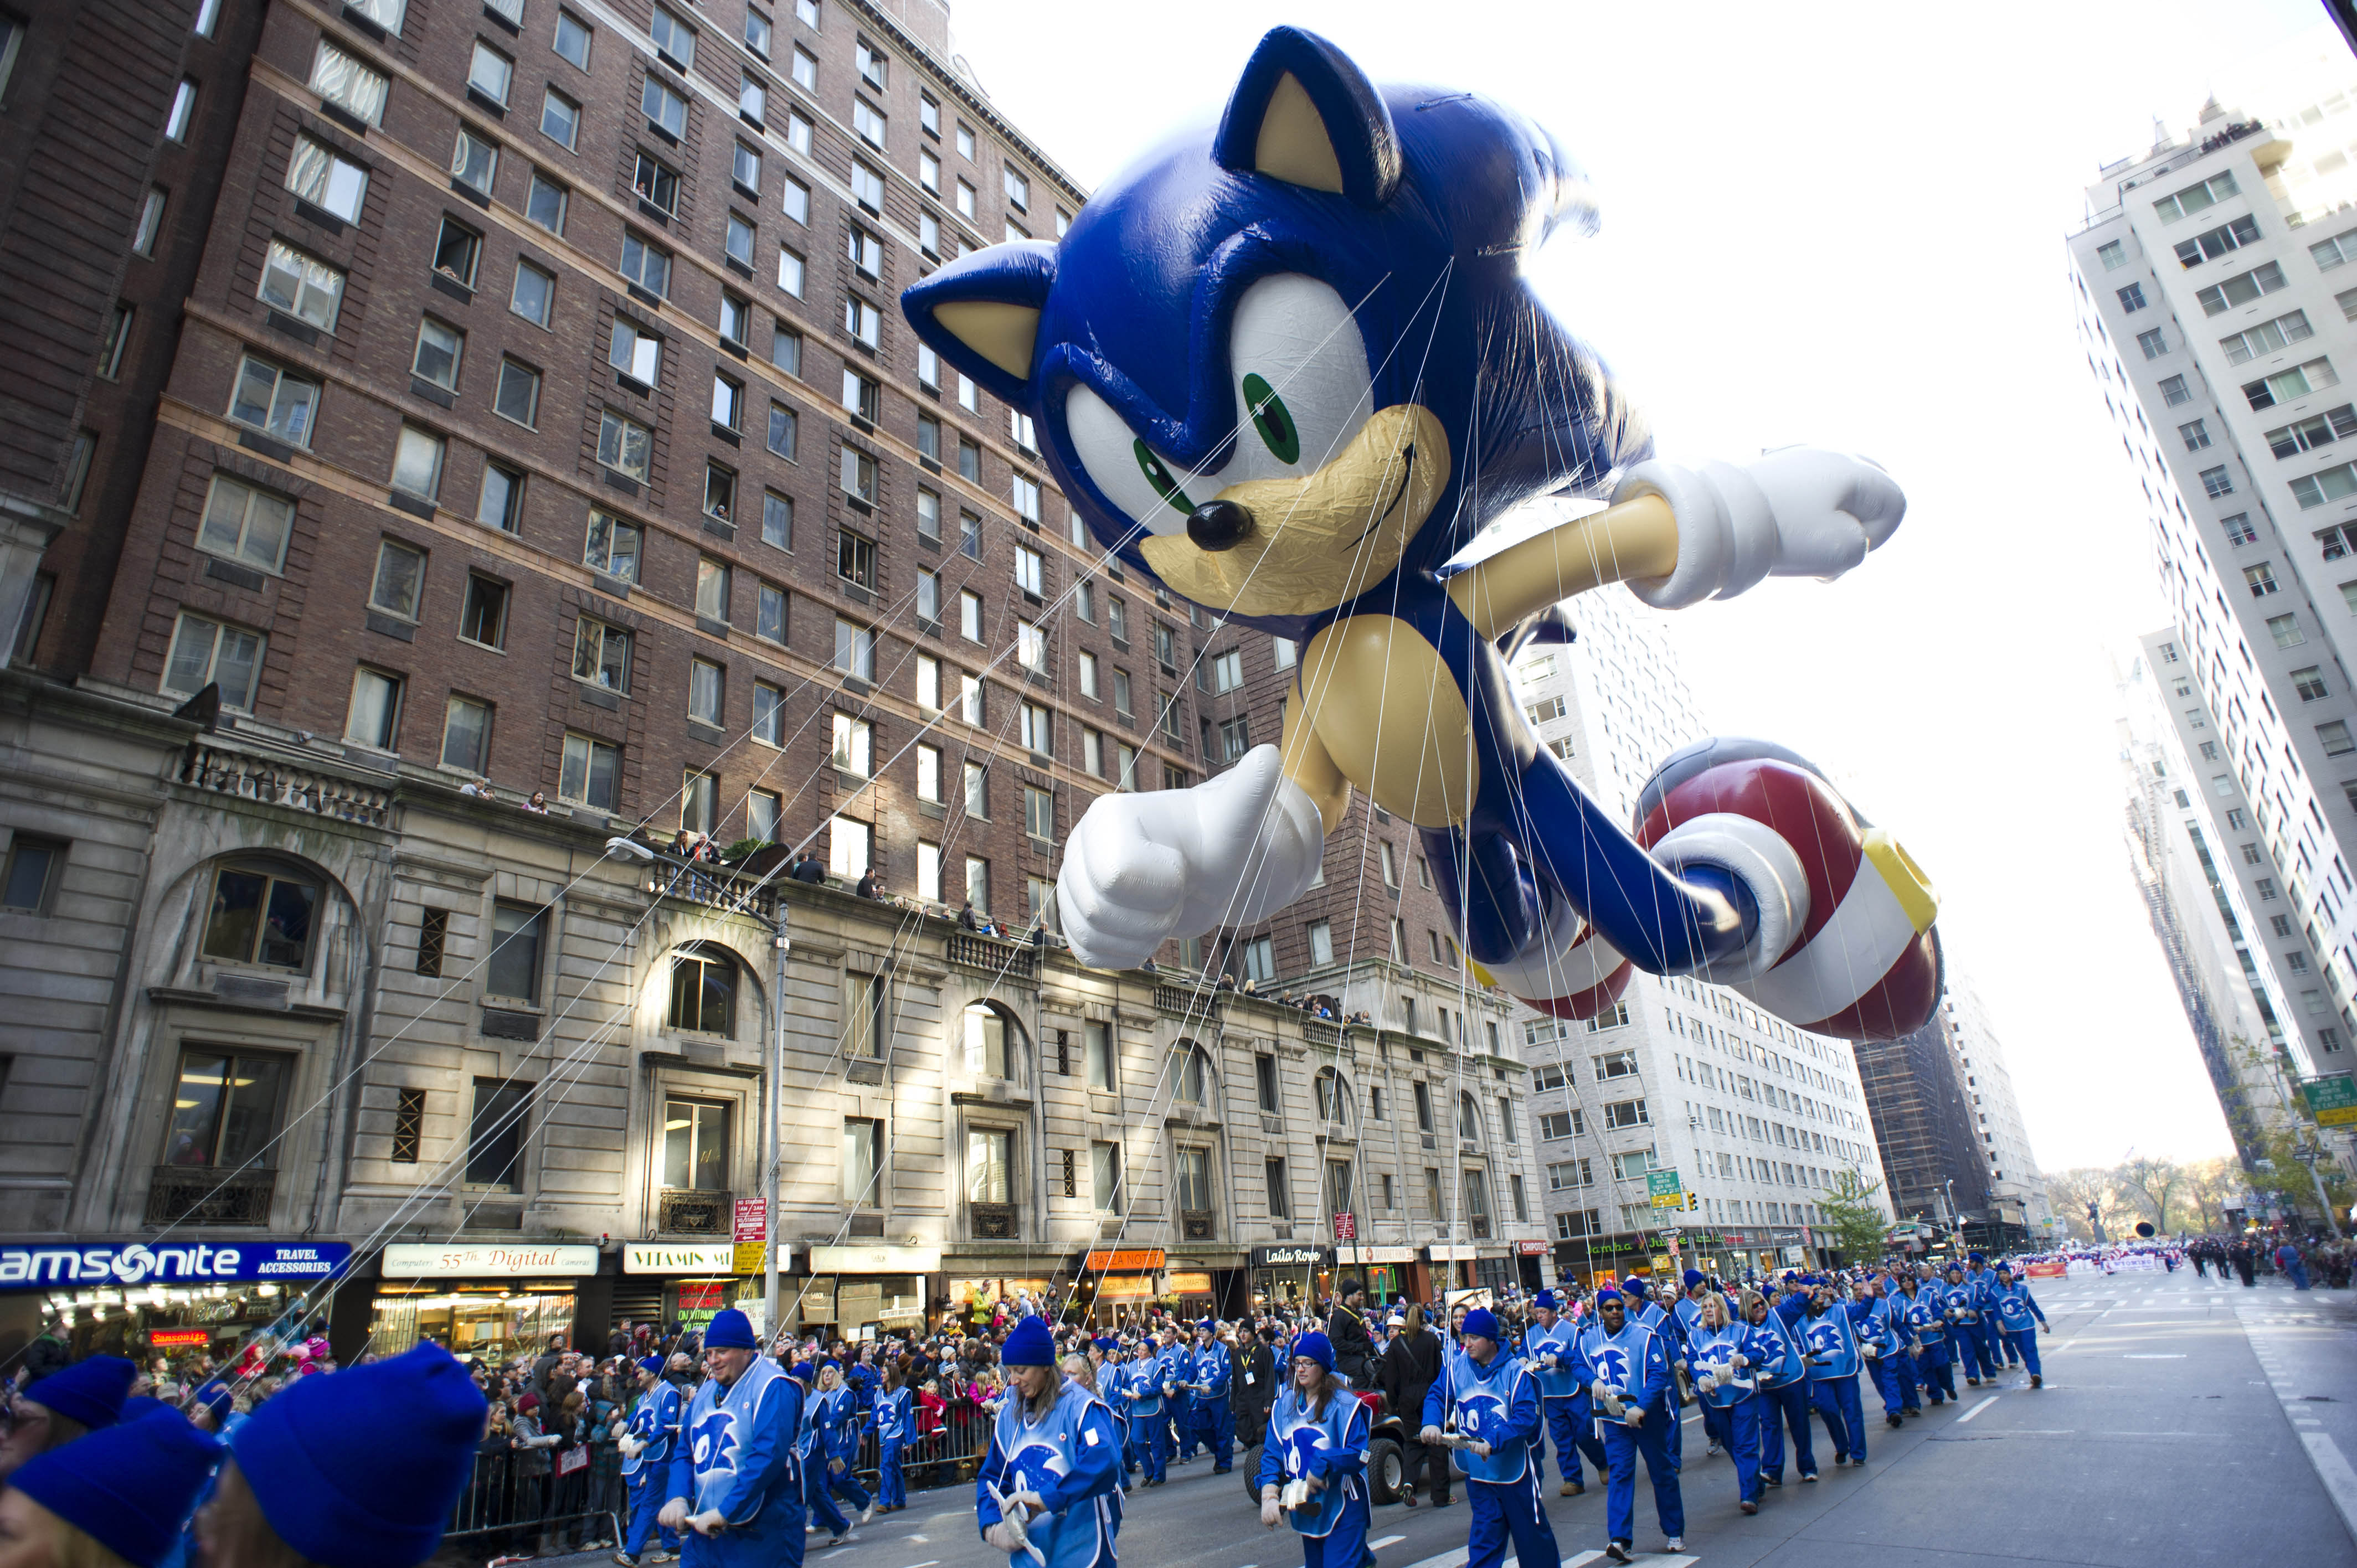 ... Macy's Thanksgiving Day Parade in New York .(AP PhotoCharles Sykes